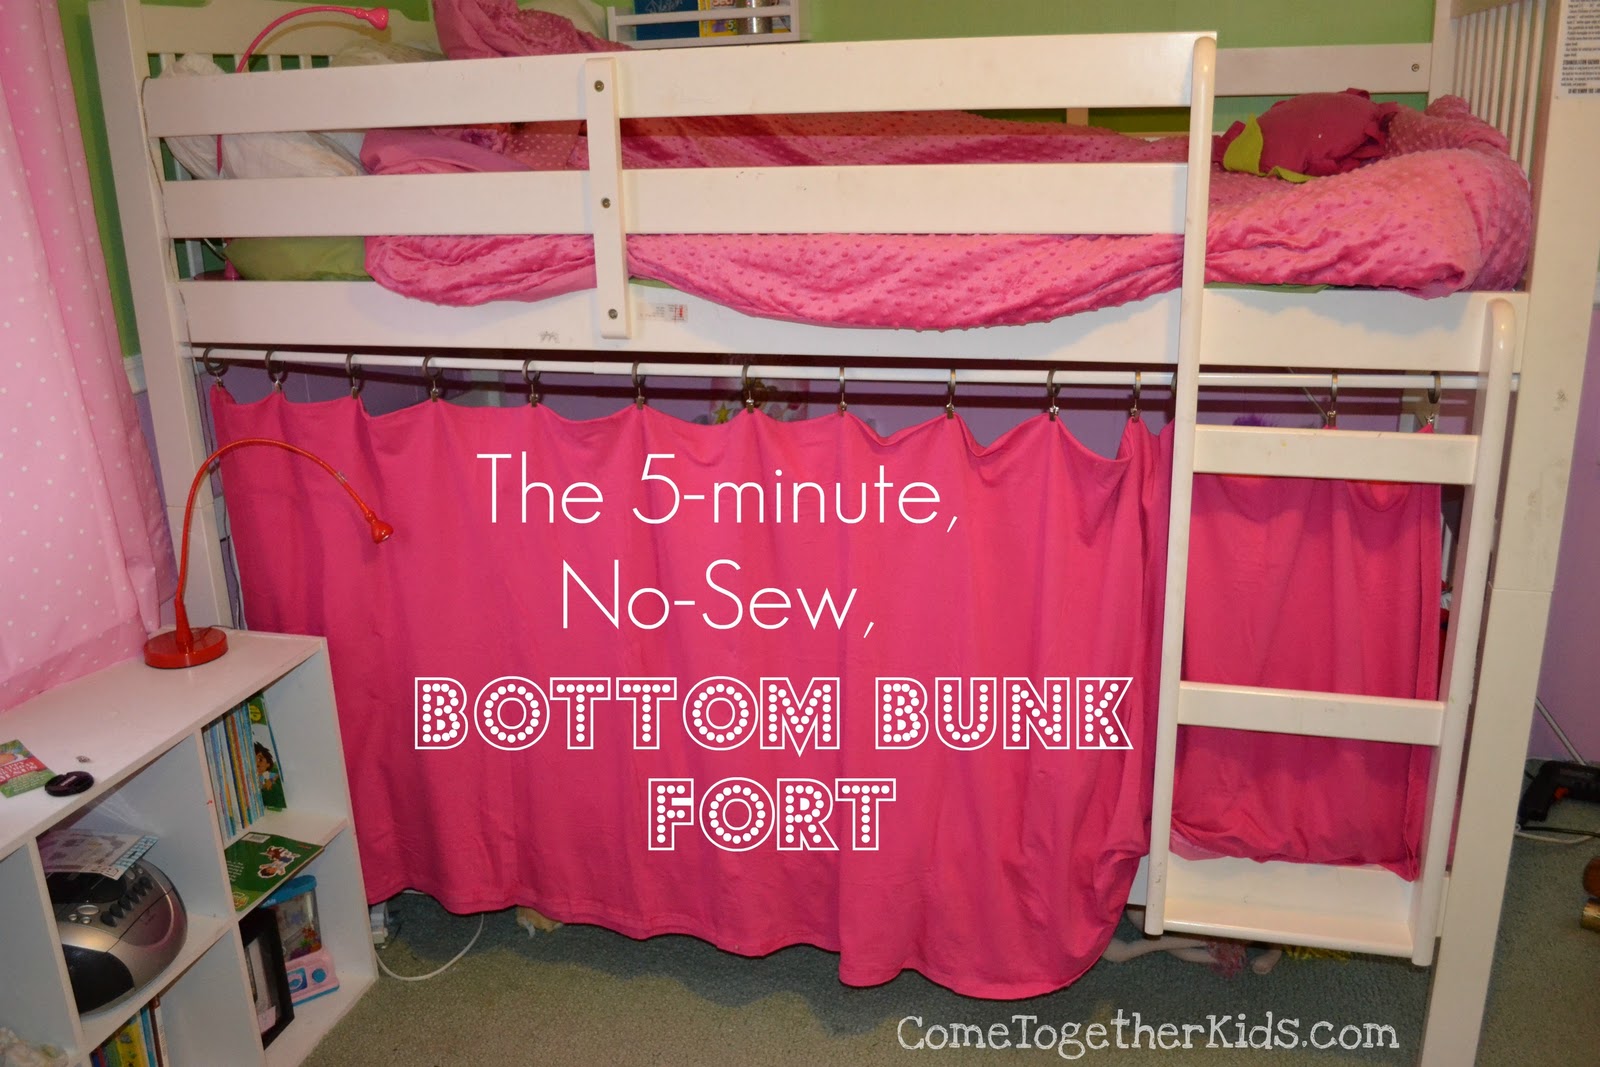 No Sew Bottom Bunk Fort, How To Put A Bunk Bed Together